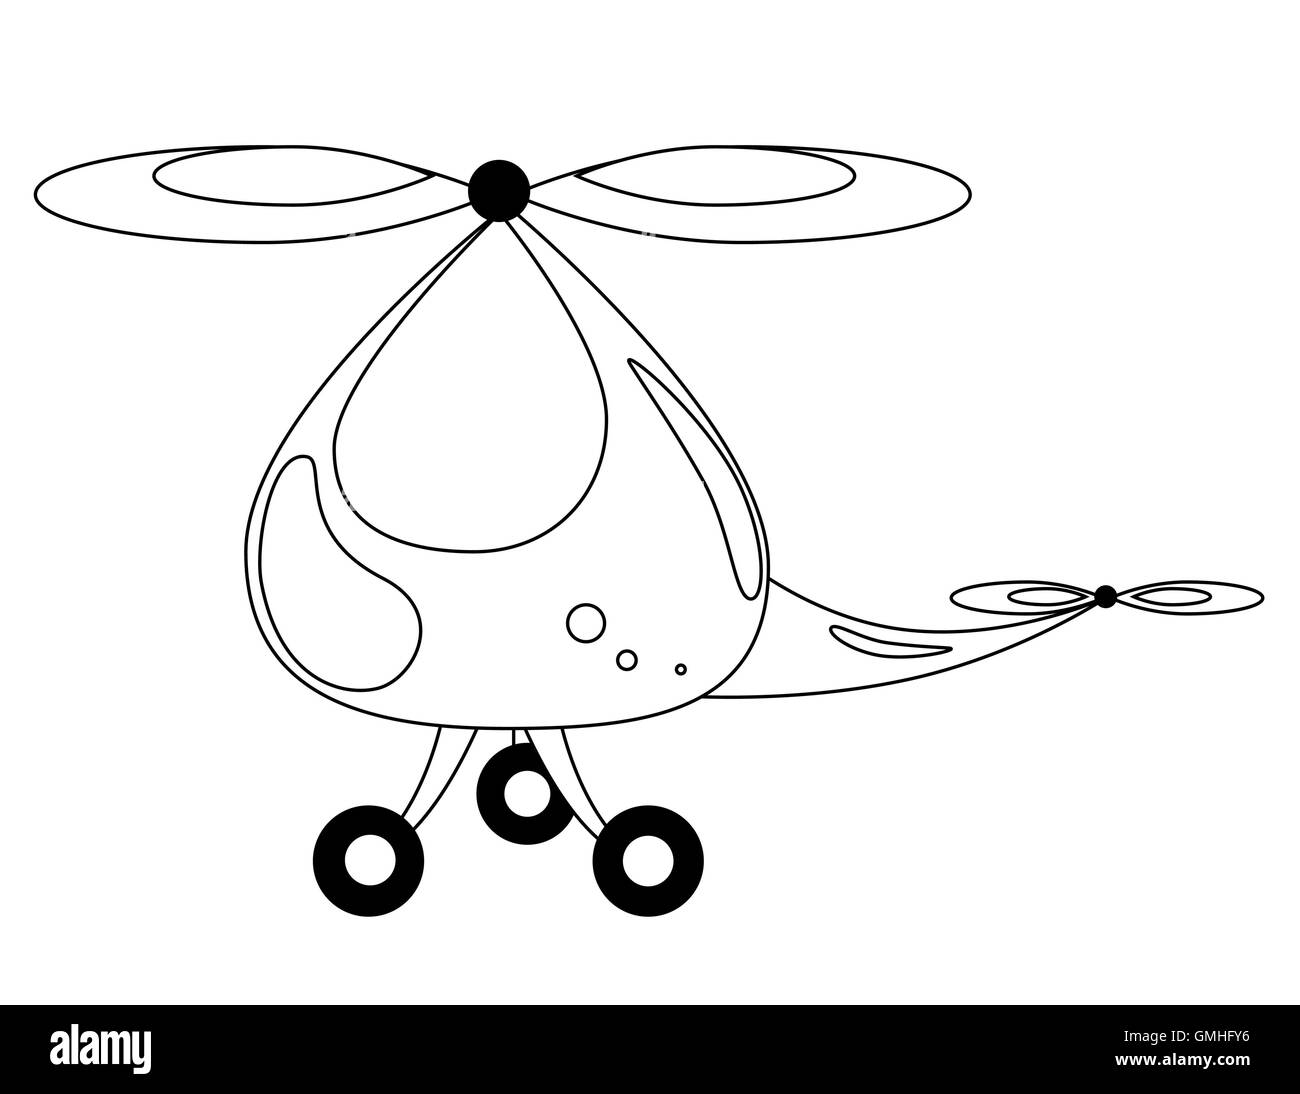 coloring helicopter Stock Vector